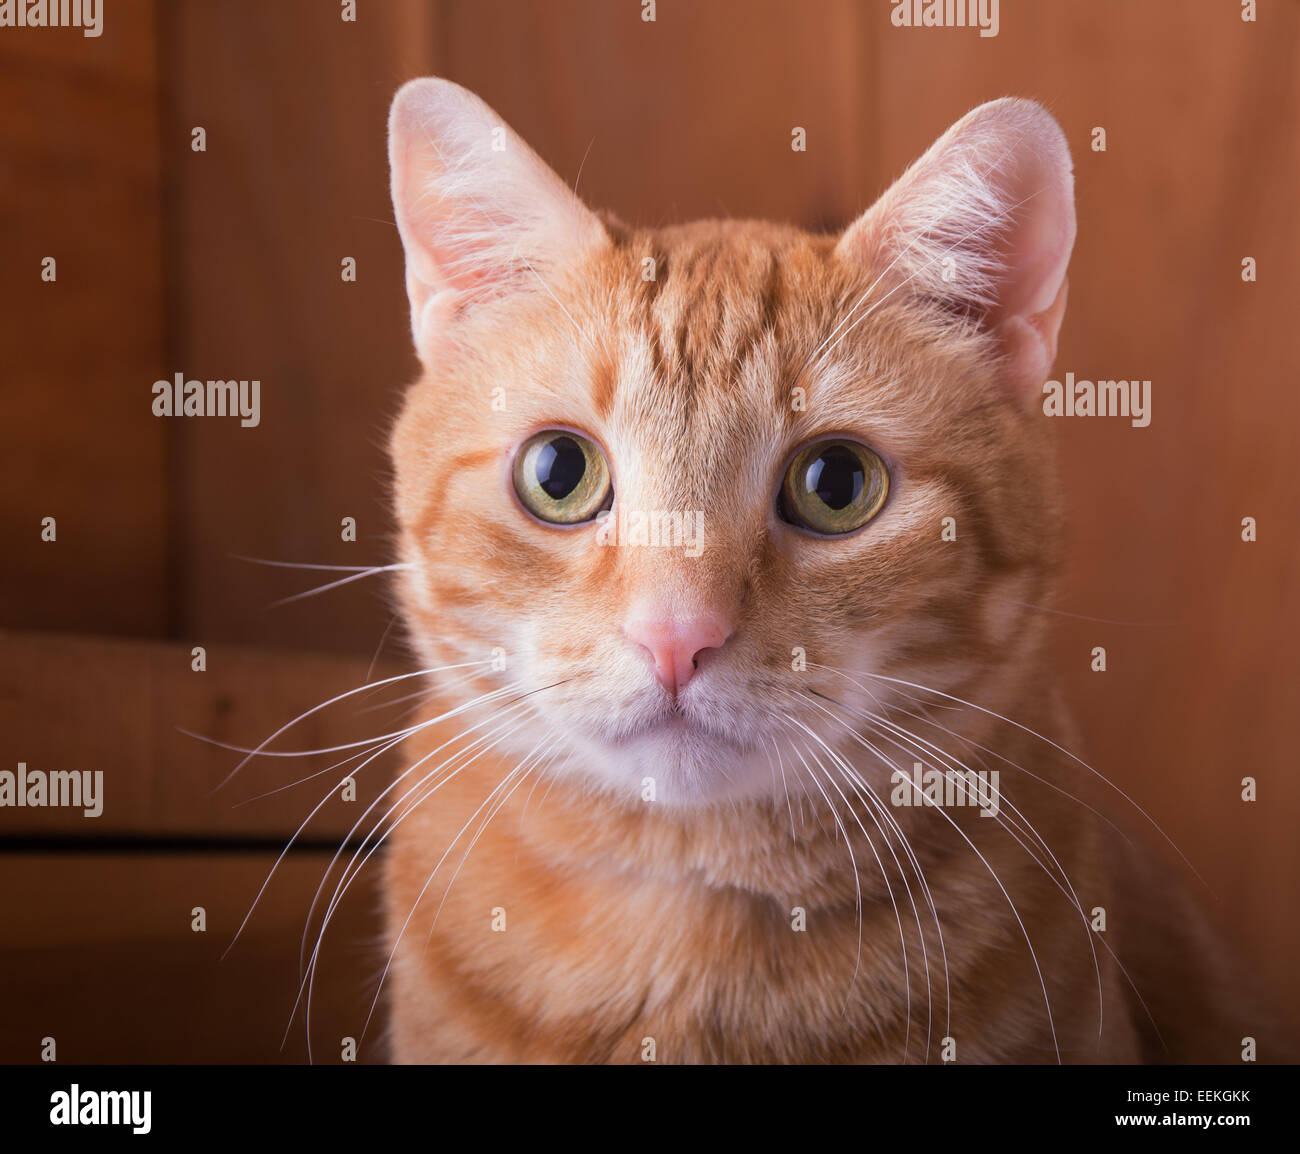 Closeup of a red tabby cat with a rustic wooden background Stock Photo